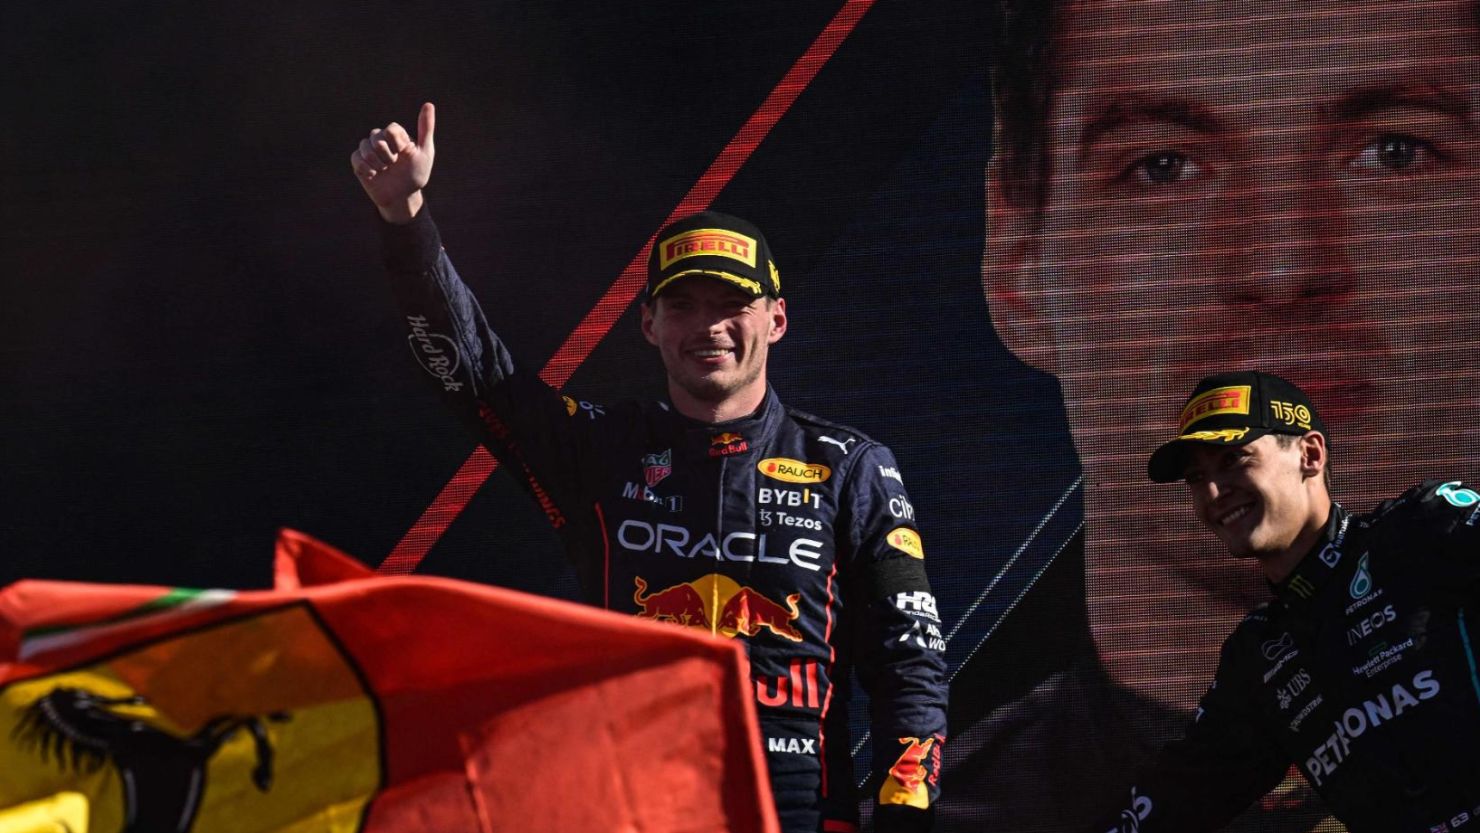 Max Verstappen celebrates victory at the Italian Grand Prix as he continues his F1 title defense. 